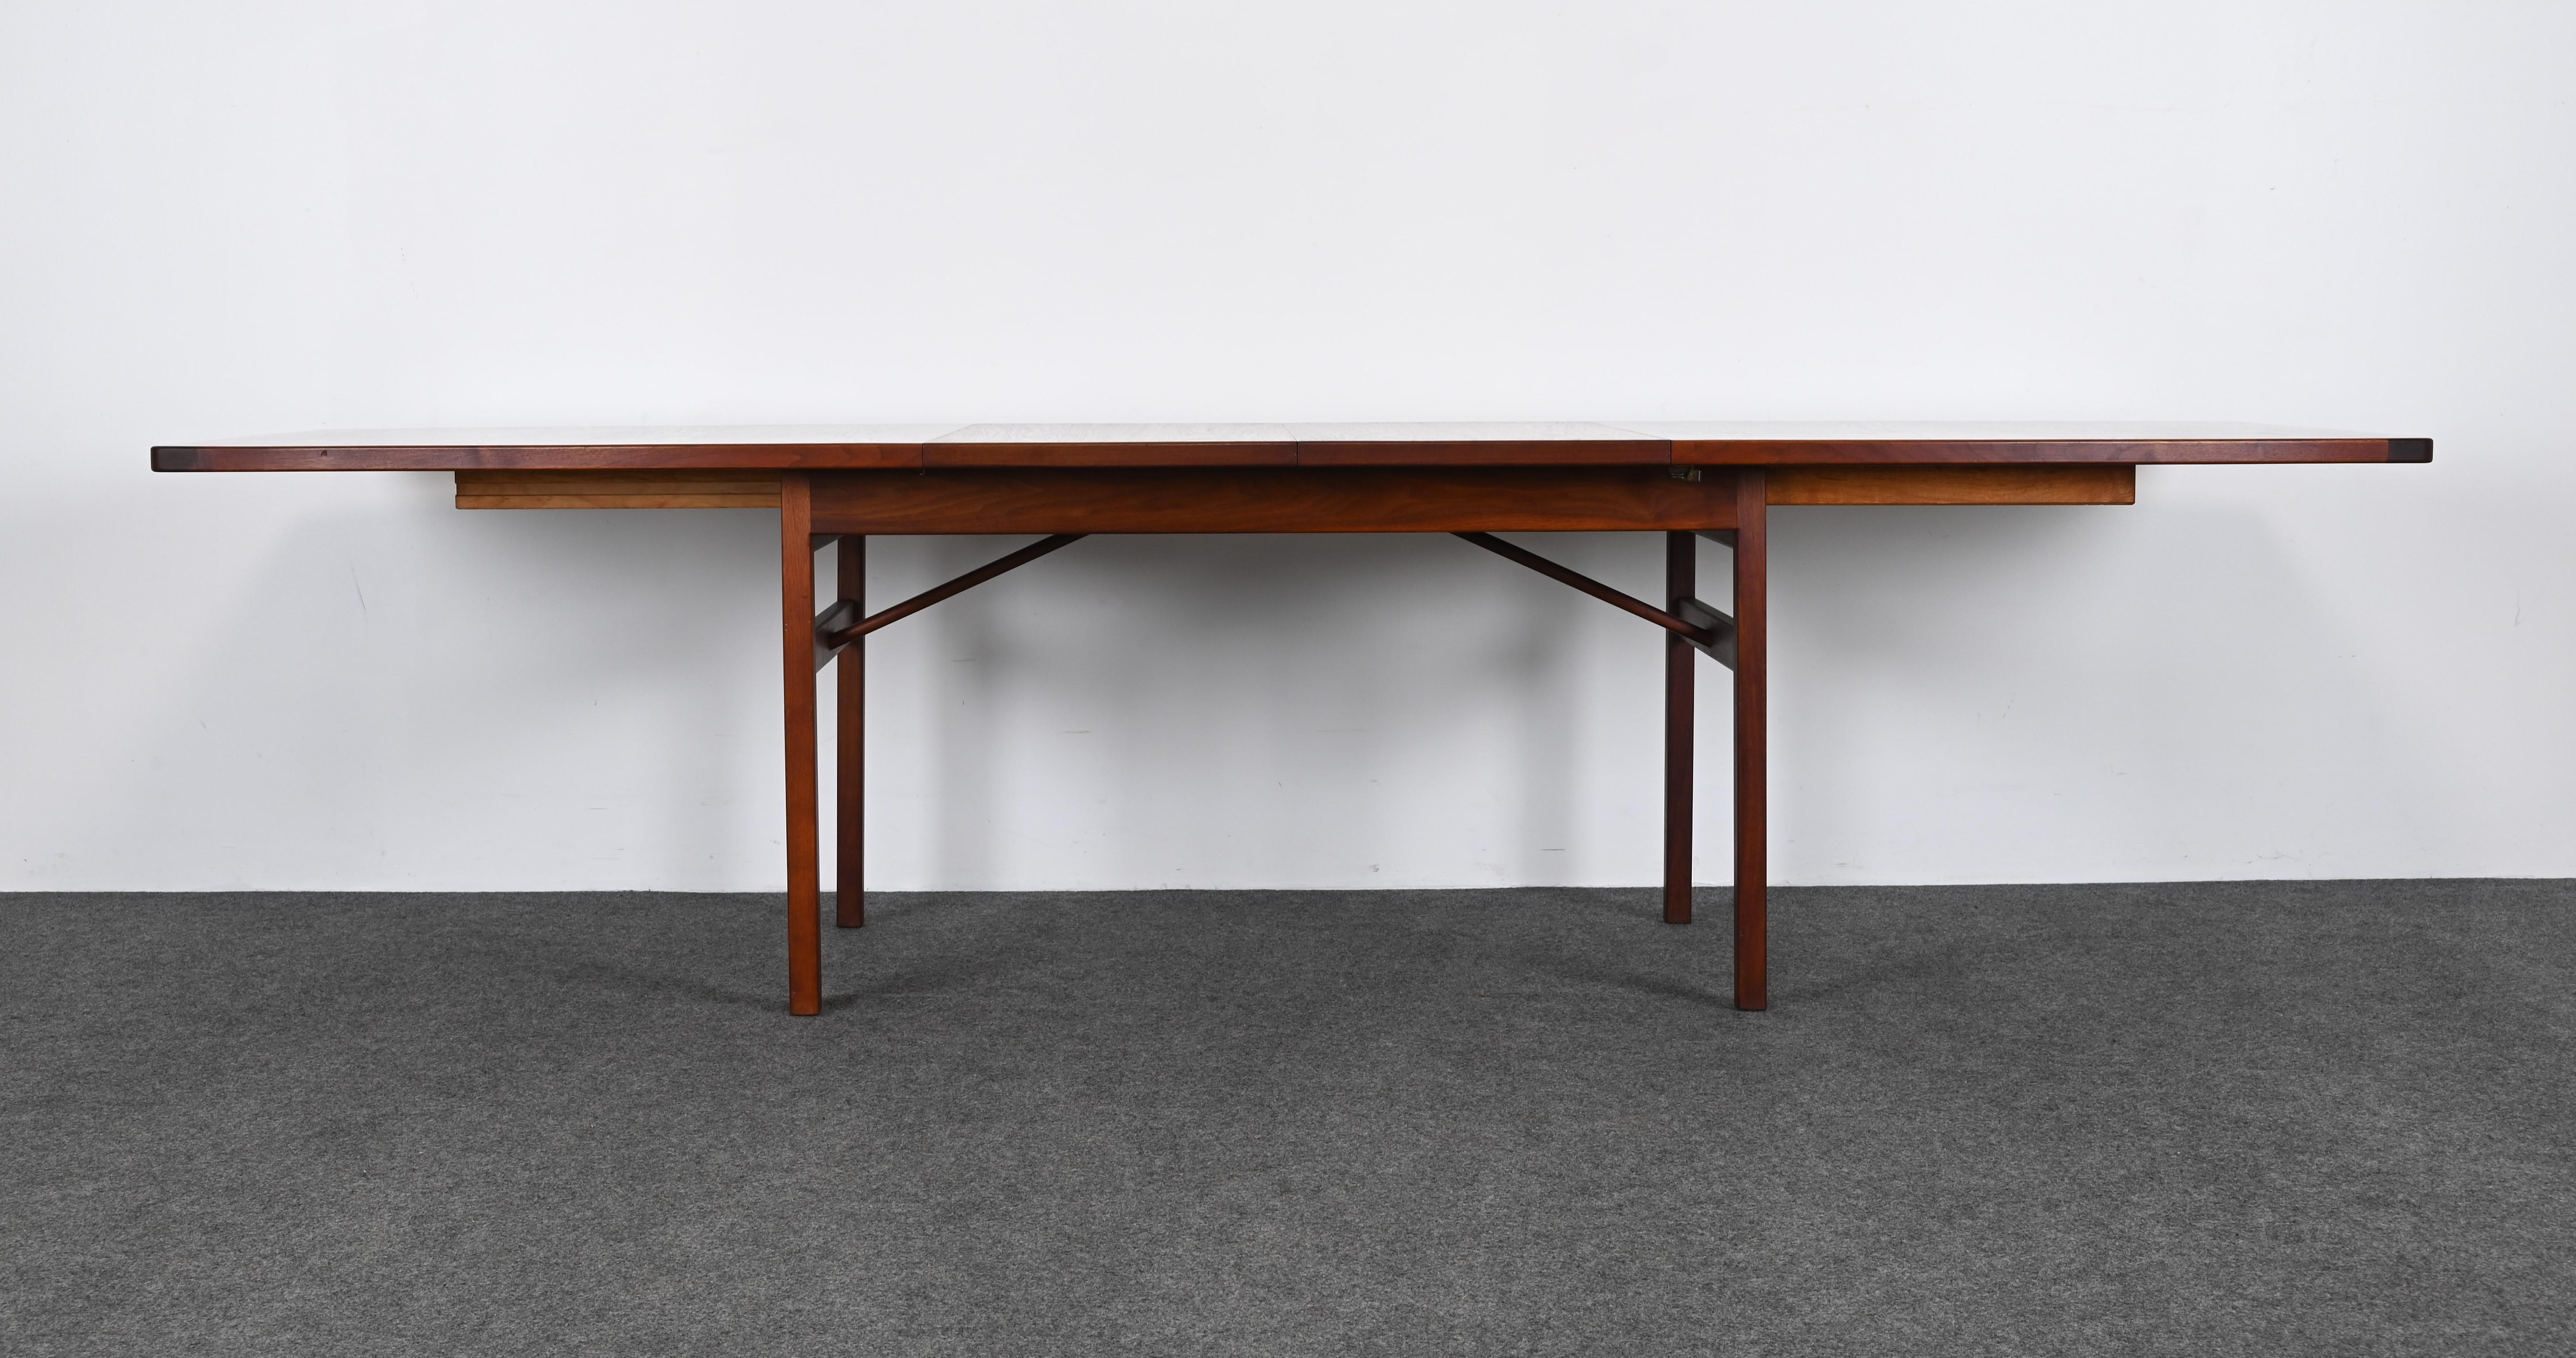 A simple line modern boat top dining table designed by Jens Risom circa 1950. The table has two leaves and extends to 112 inches. The Danish Modern style table retains its original finish. The leaves of the table are slightly lighter but overall not